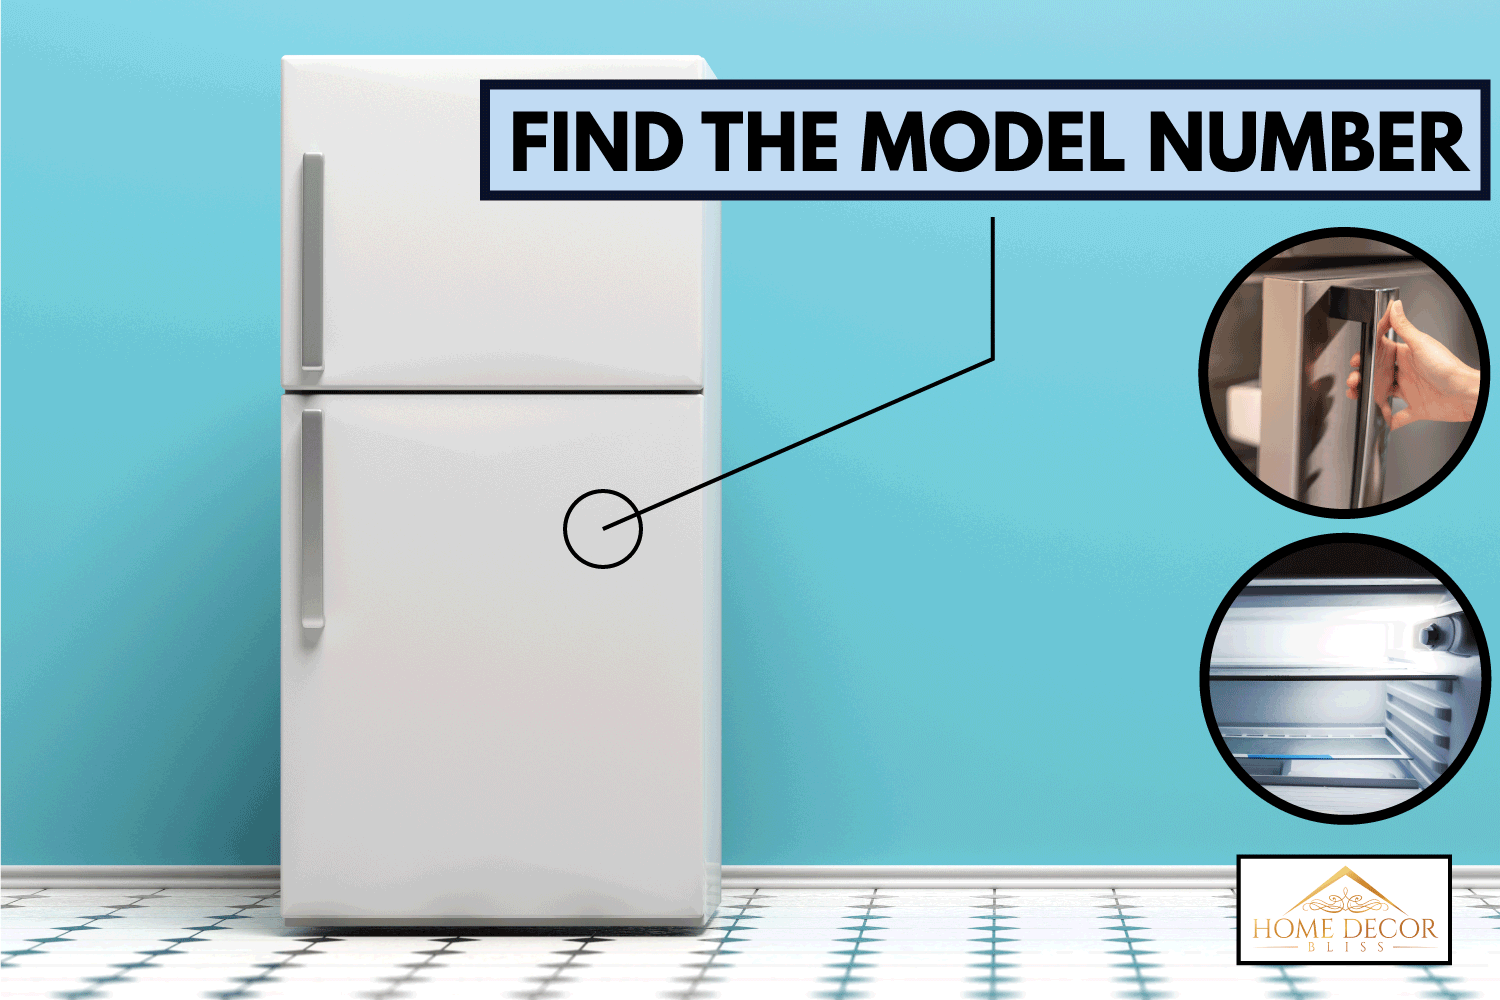 Refrigerator, fridge on kitchen tiled floor, blue wall background. How To Find The Model Number On A Kenmore Refrigerator